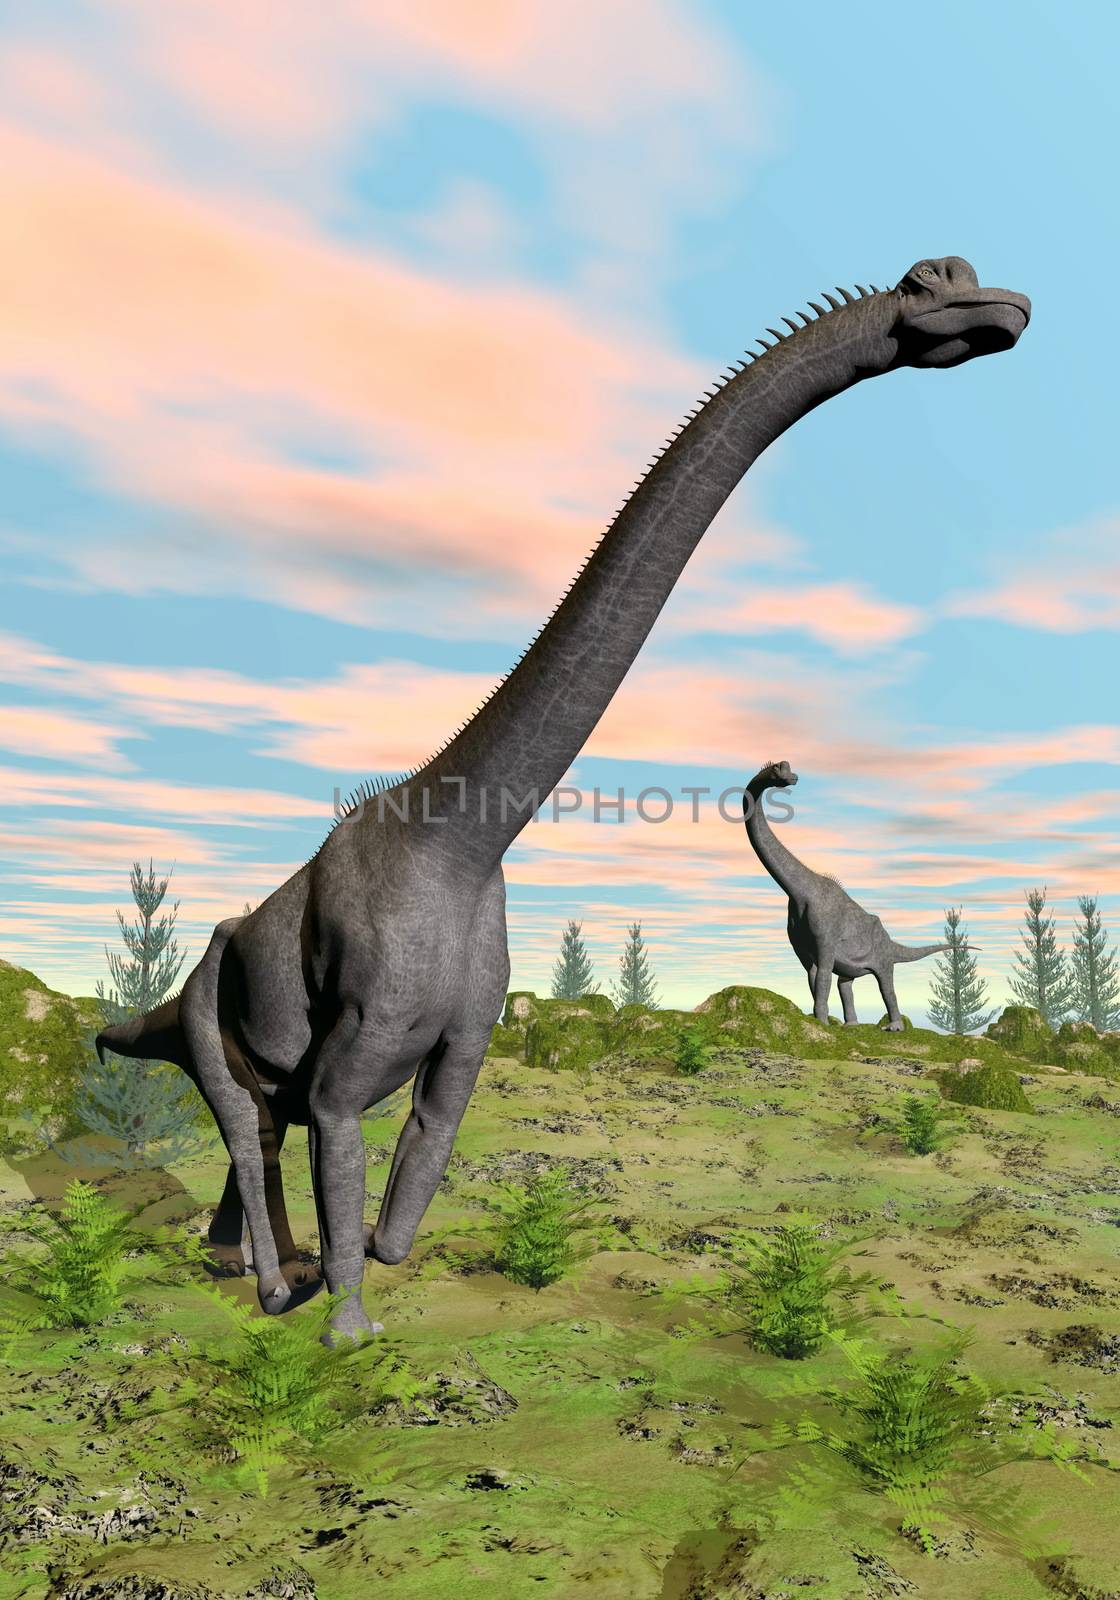 Two brachiosaurus dinosaurs in nature with green grass by colorful sunset